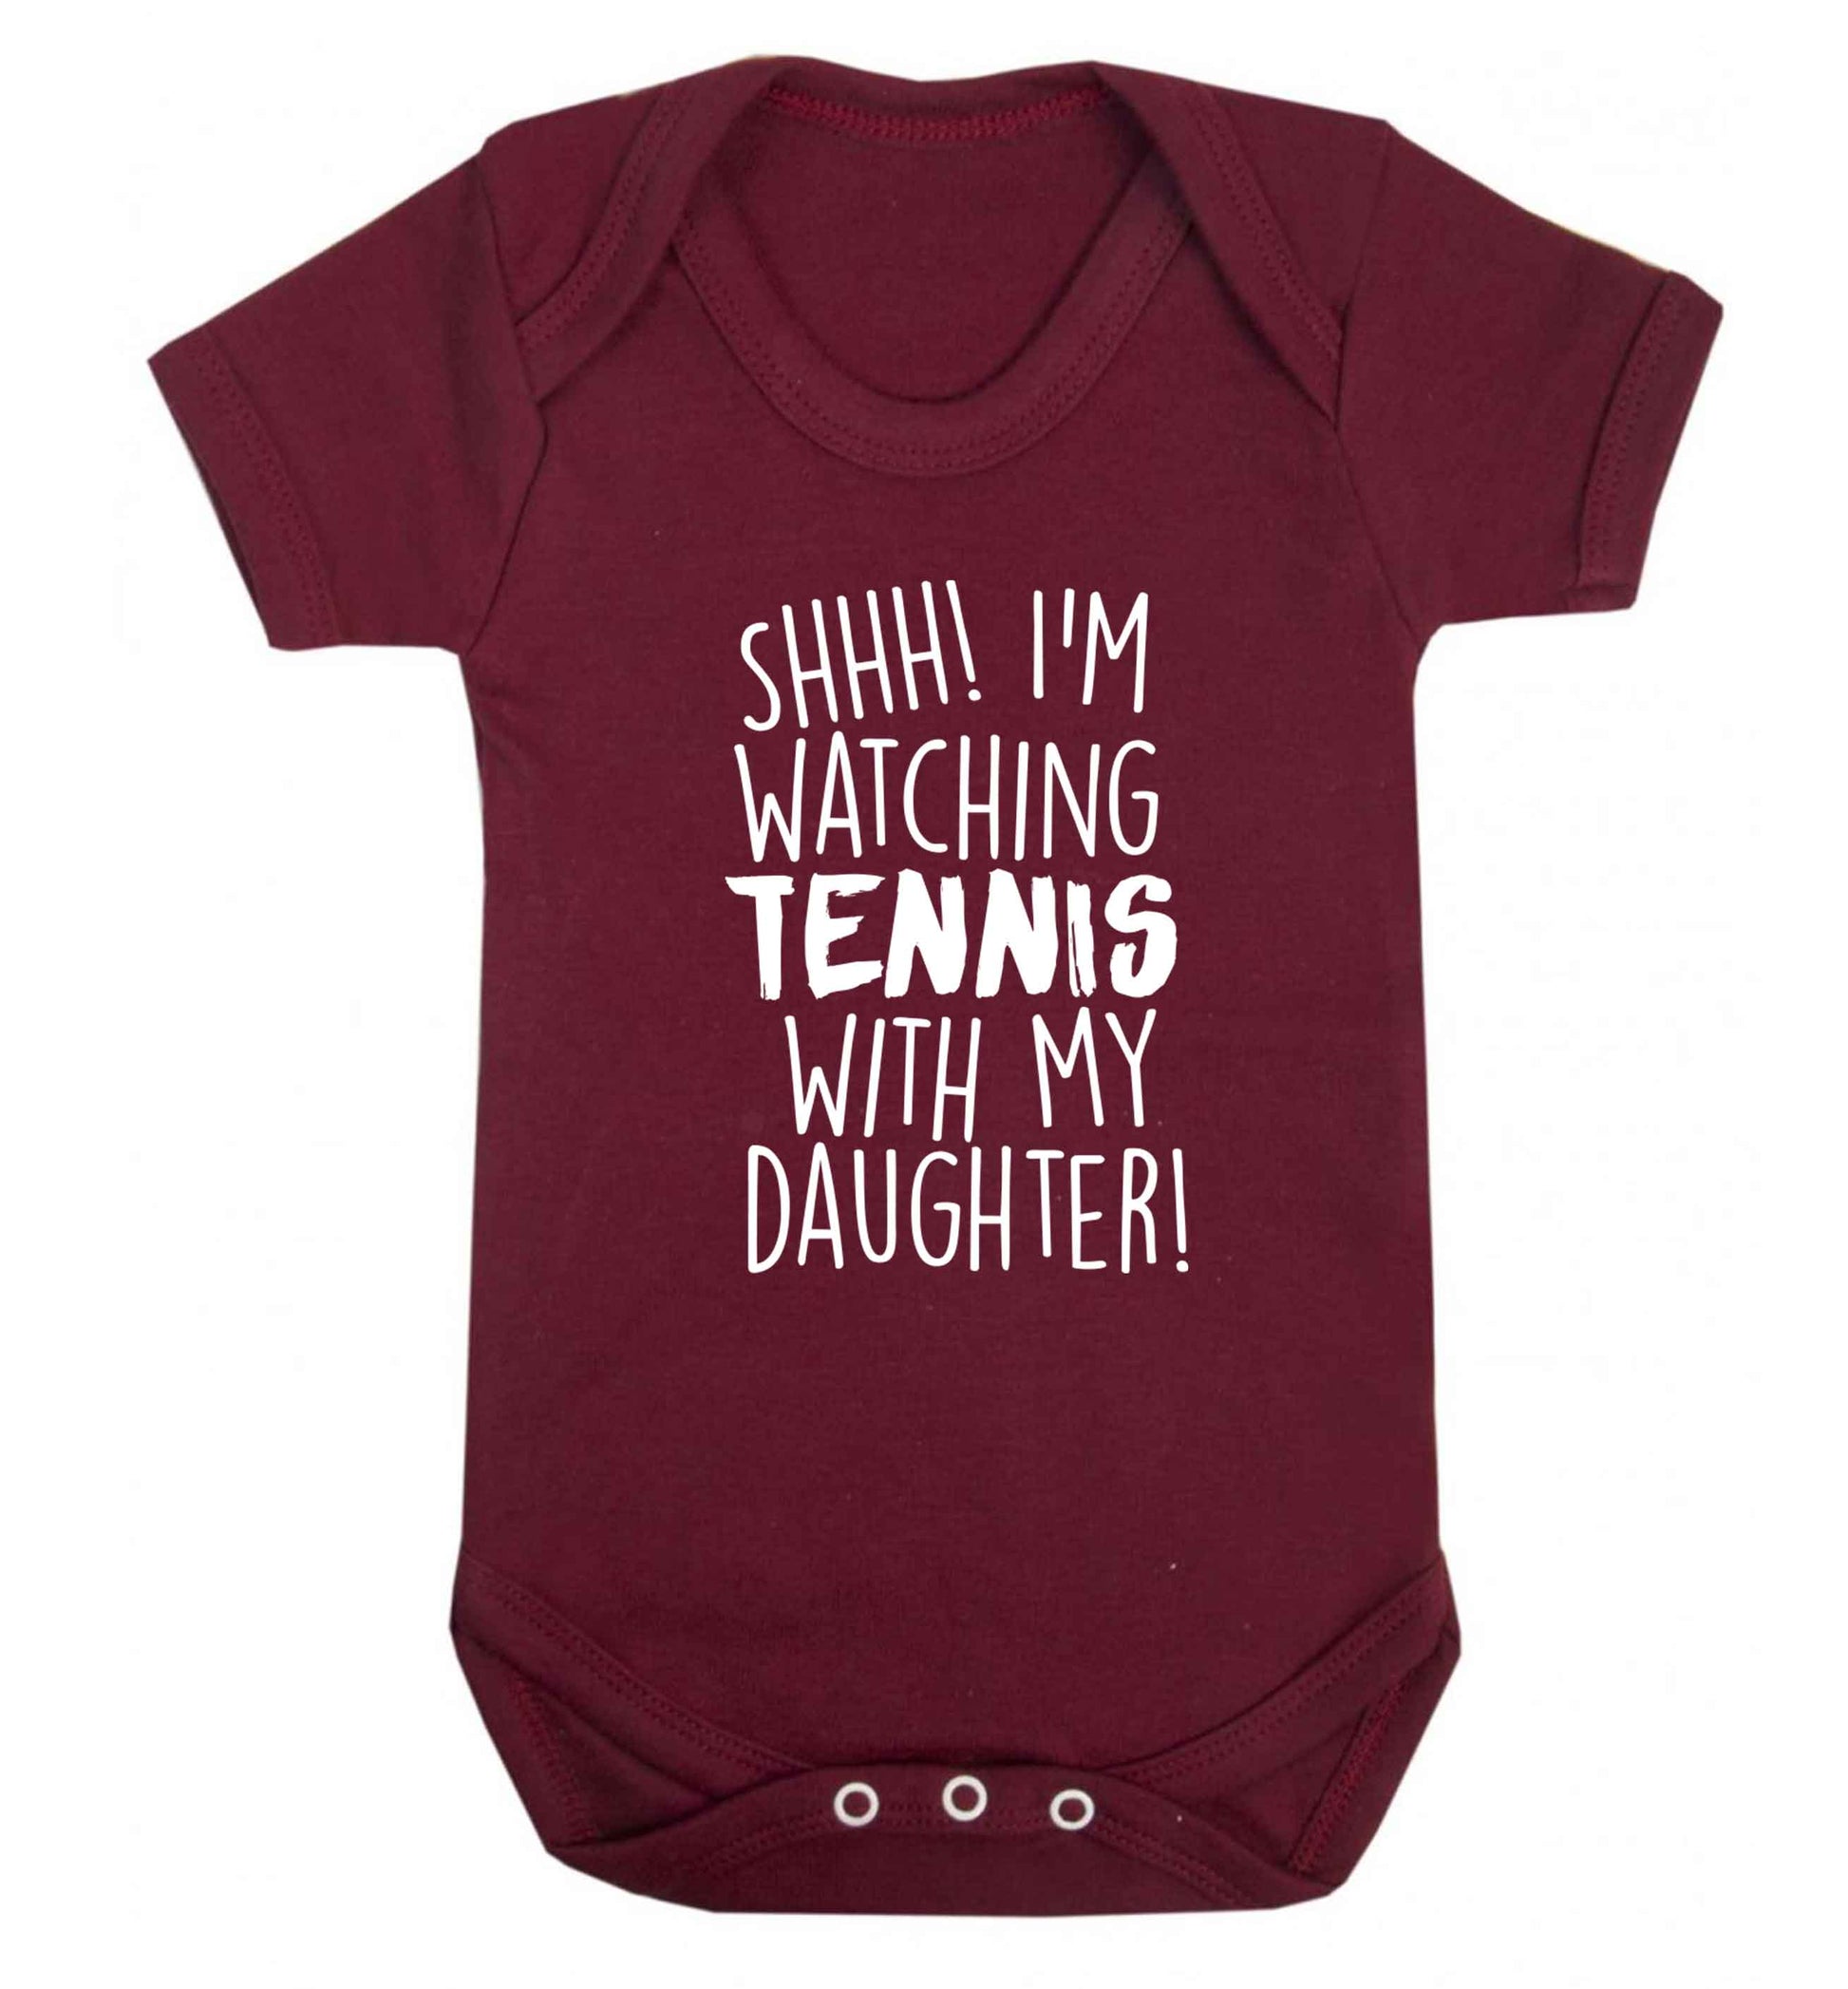 Shh! I'm watching tennis with my daughter! Baby Vest maroon 18-24 months